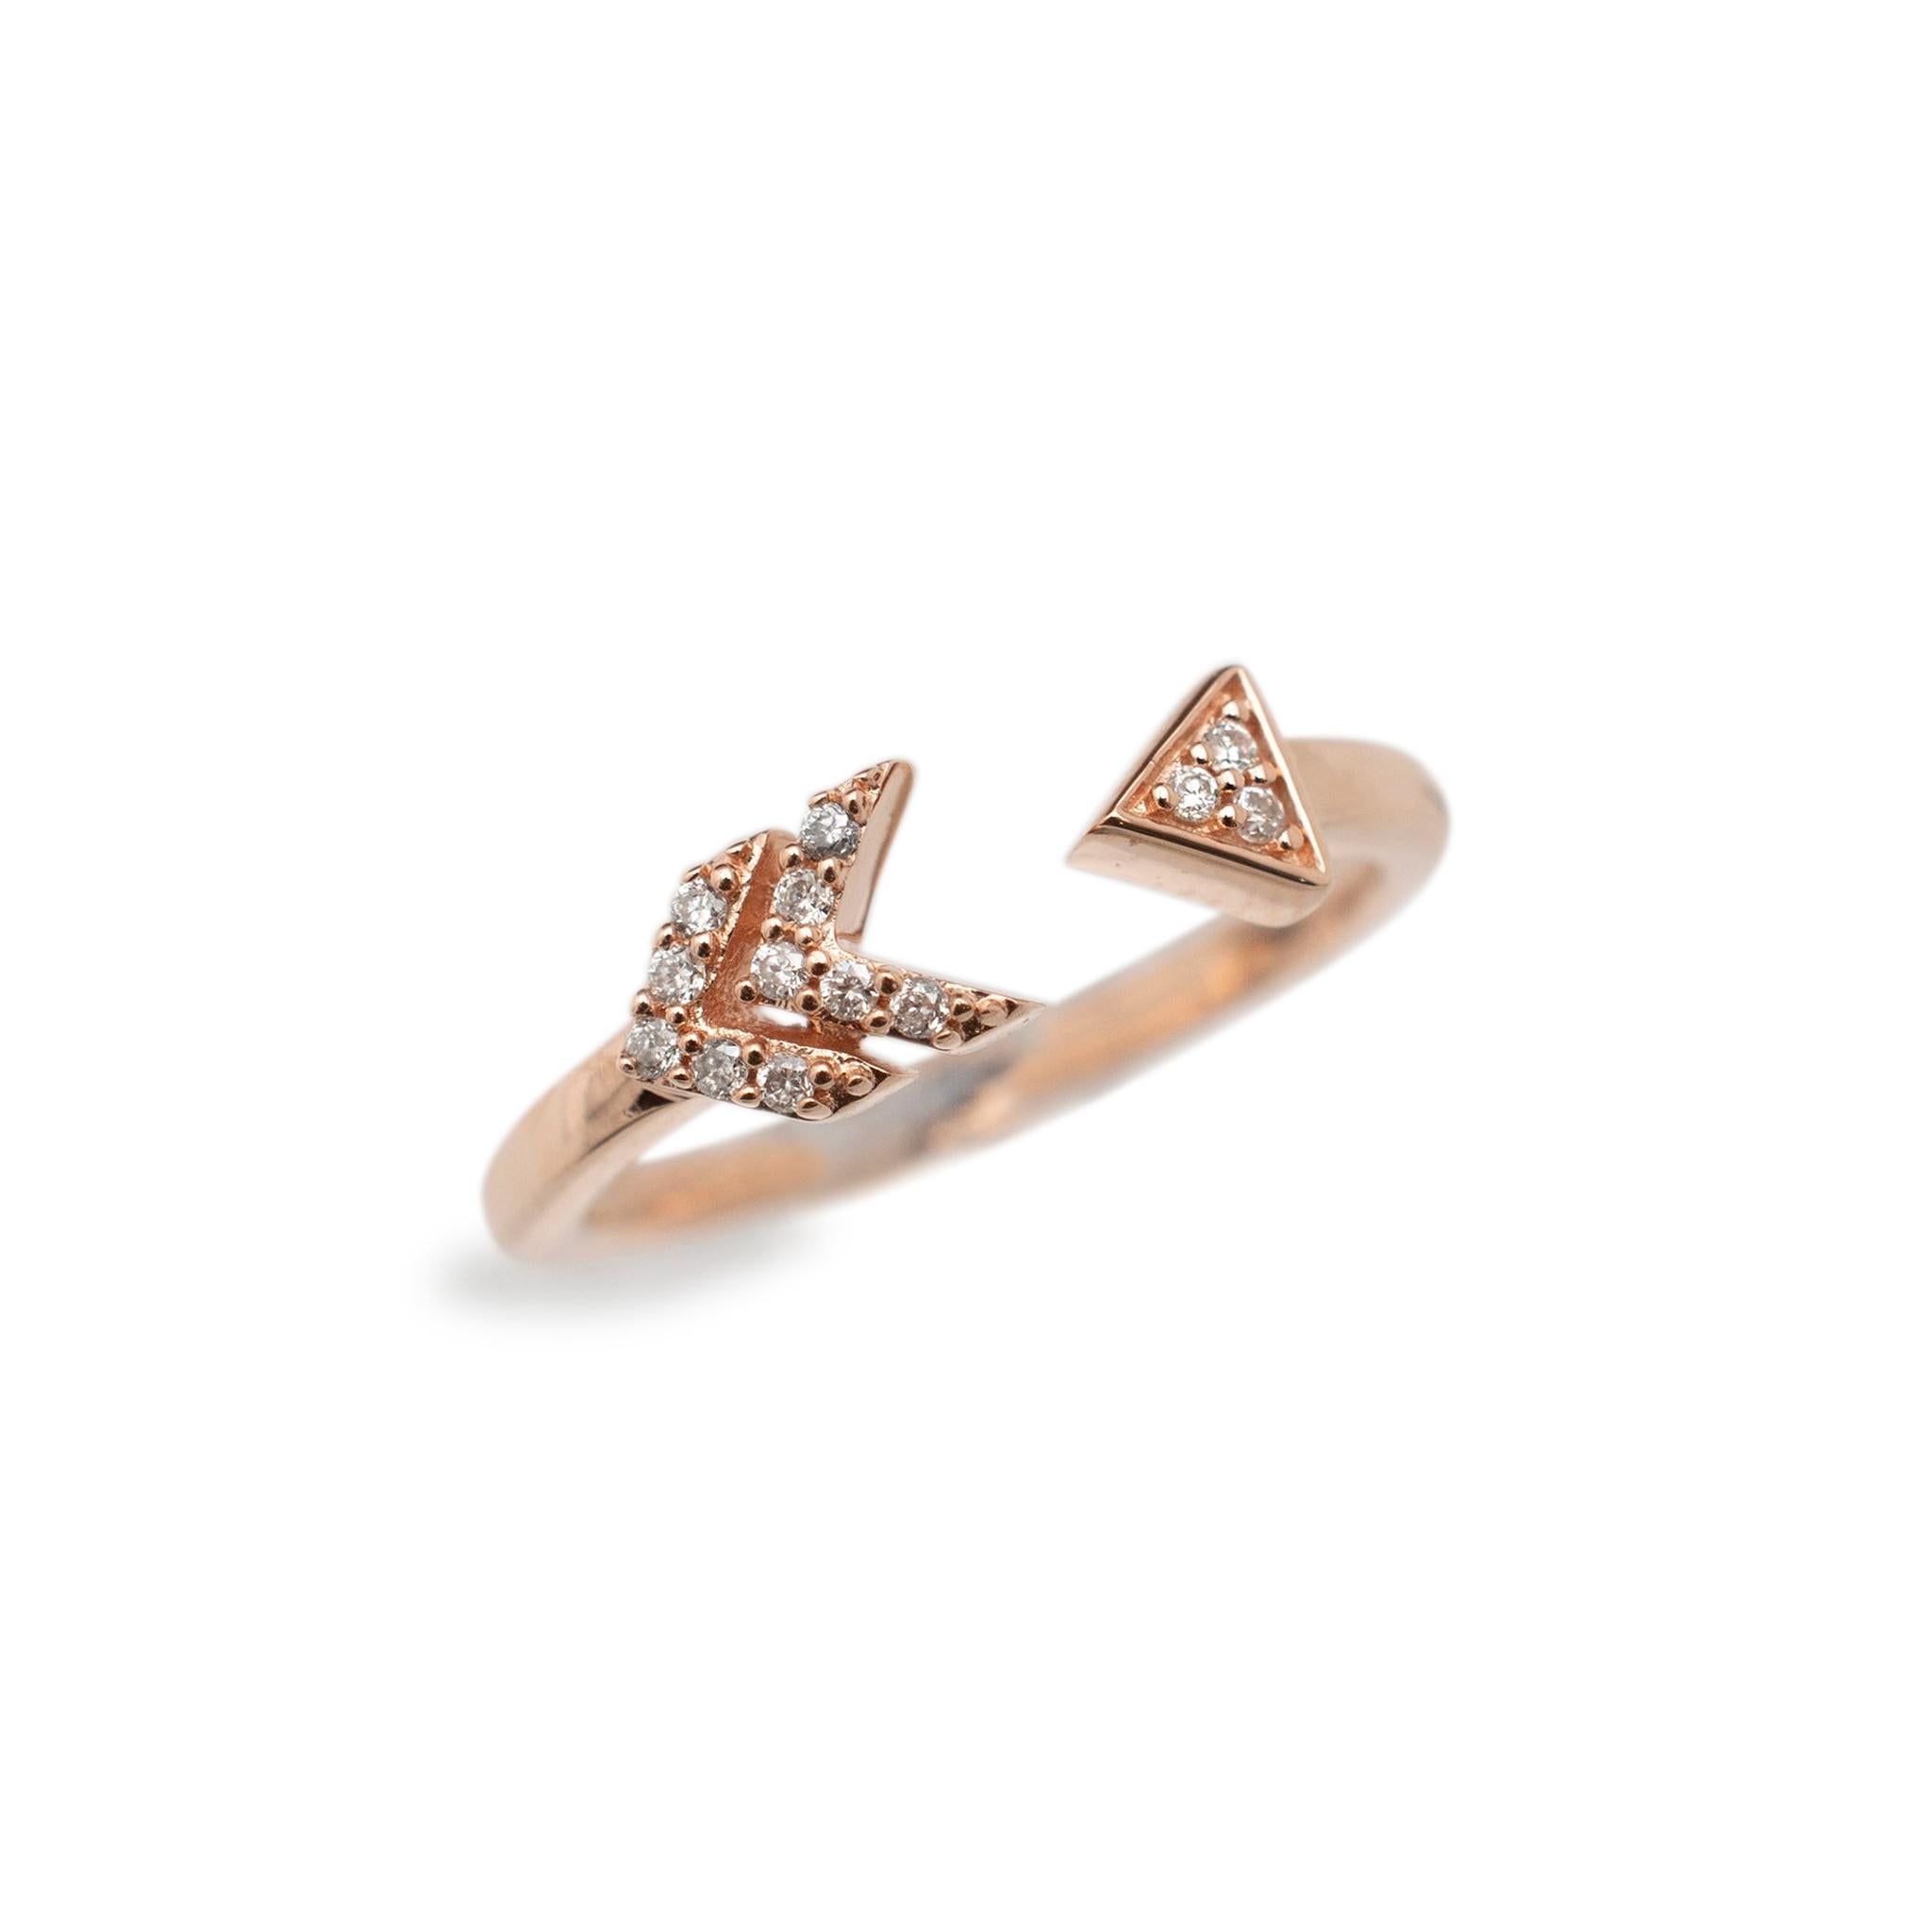 Gender: Ladies

Metal Type: 10K Rose Gold

Size: 4

Shank Maximum Width: 4.75 mm tapering to 1.45 mm

Weight: 1.57 grams

Ladies 10K rose gold diamond cocktail ring with a half round shank. 

Pre-owned in excellent condition. Might shows minor signs